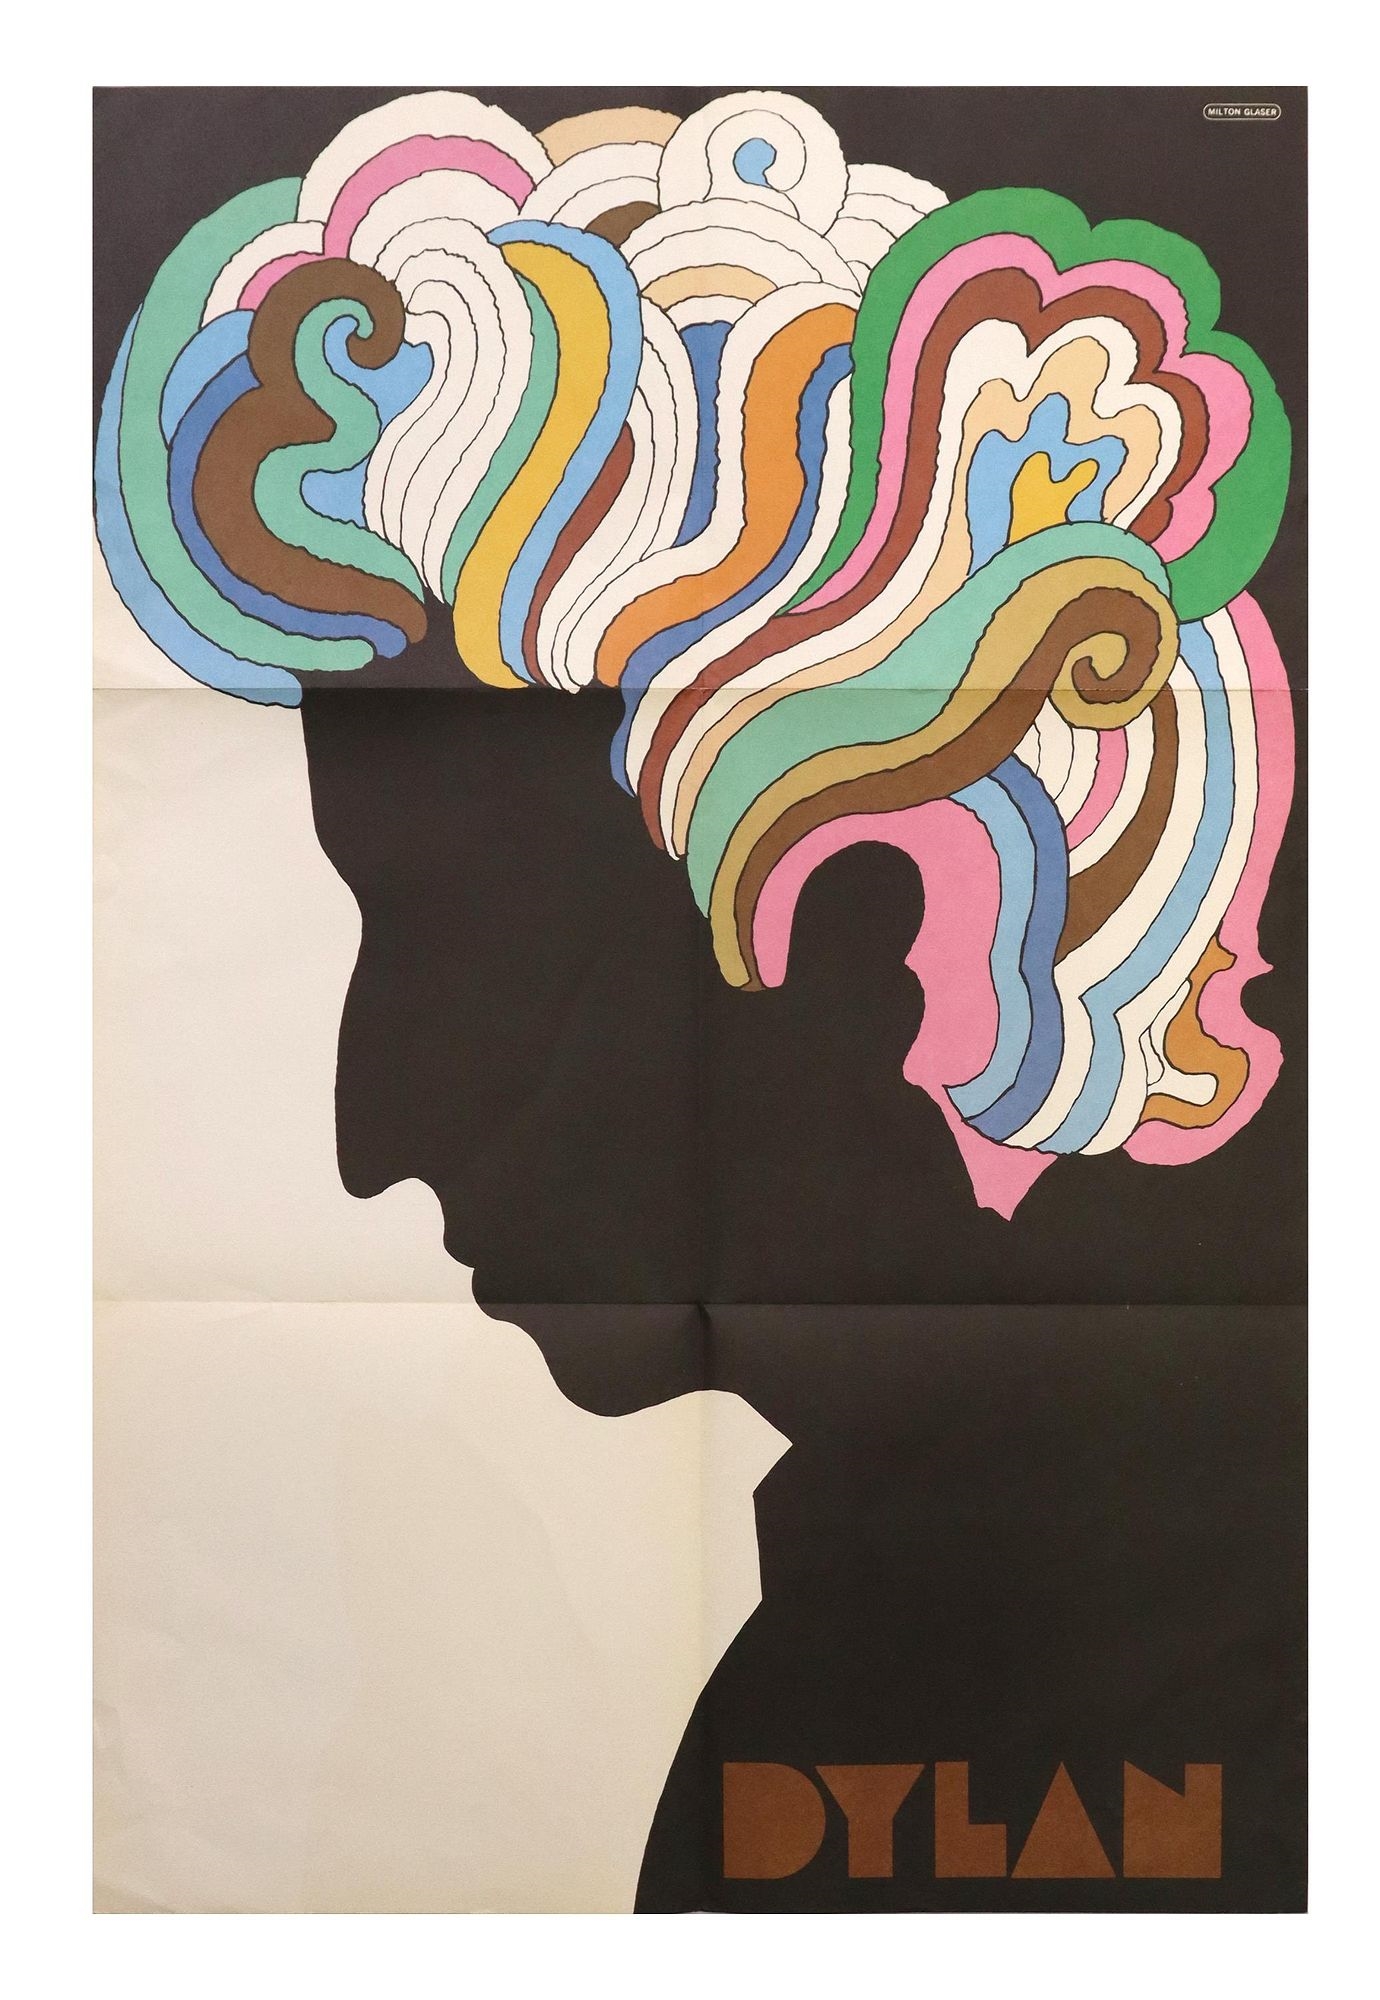 Bob Dylan's Greatest Hits on CBS Records by Milton Glaser